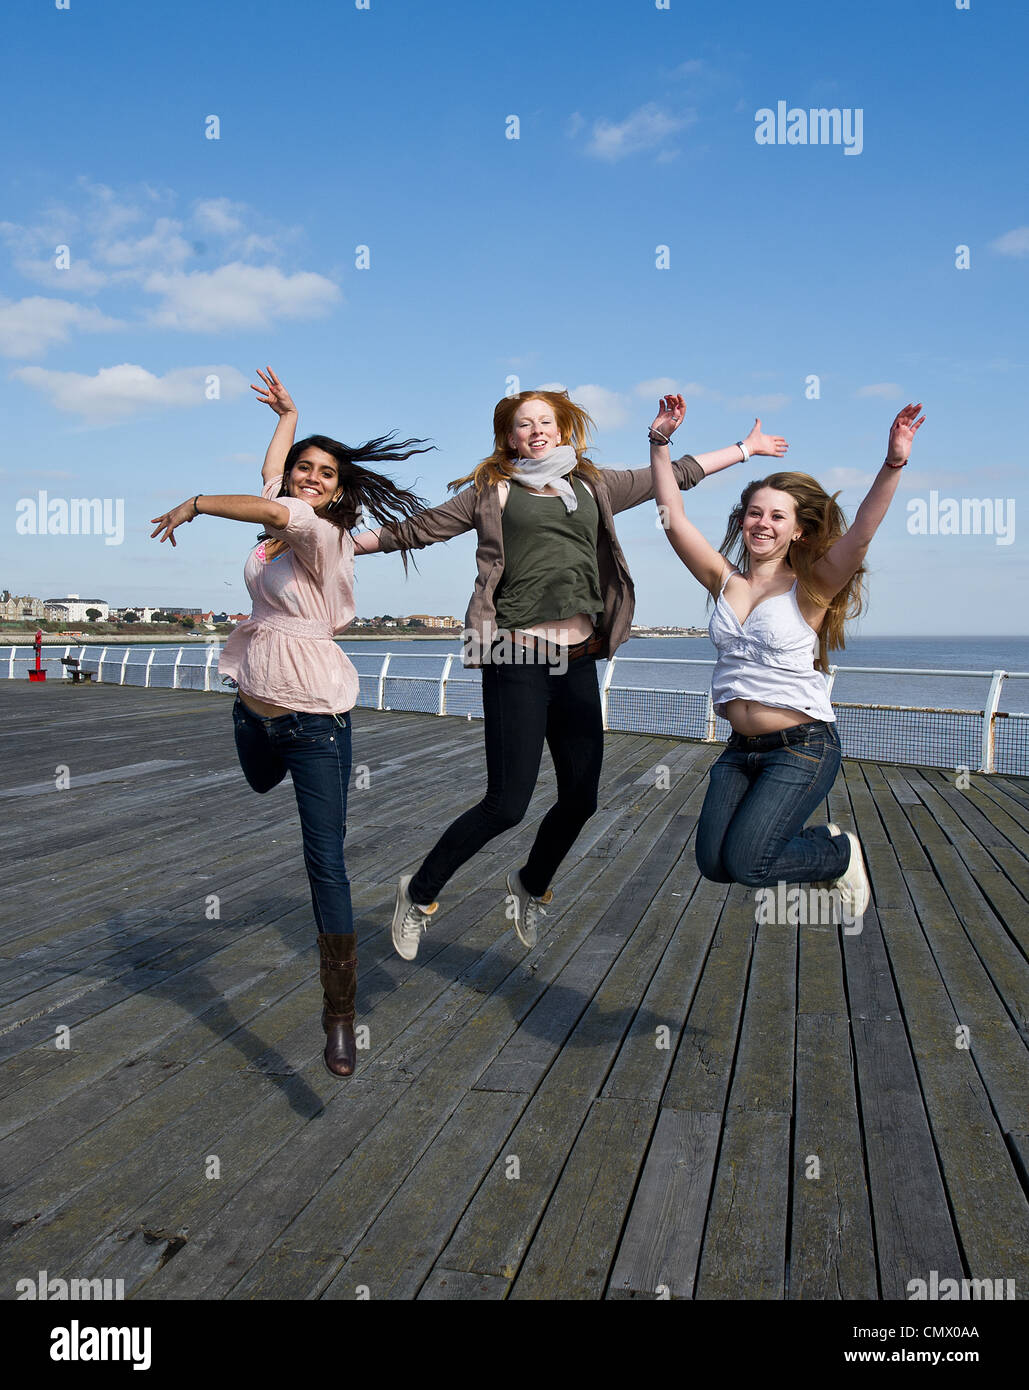 Three young girls jumping into the air Stock Photo